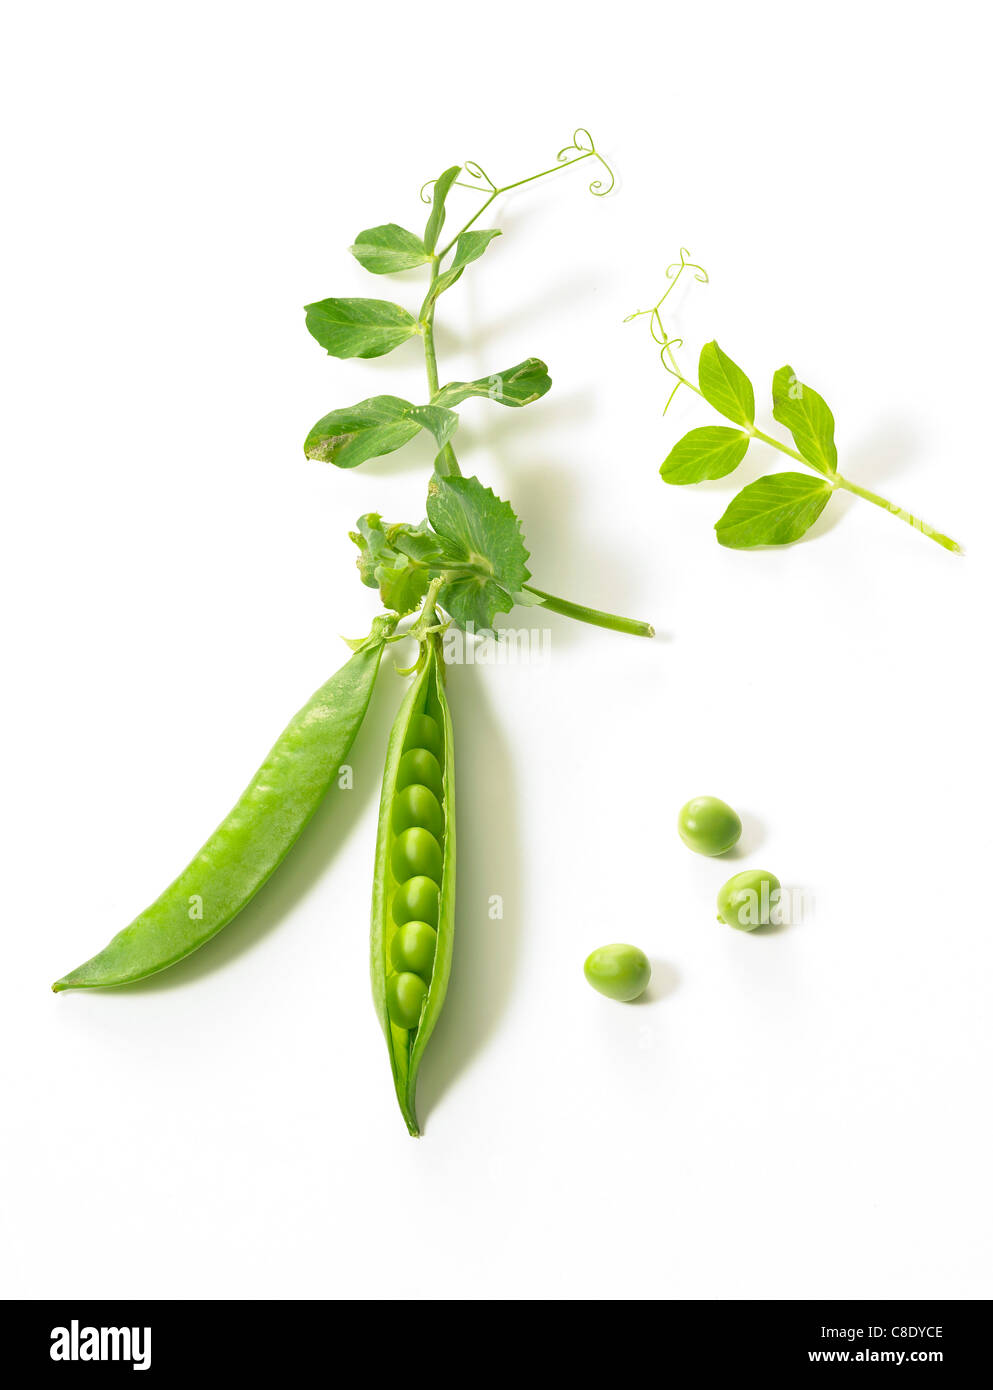 Peas in their pods Stock Photo